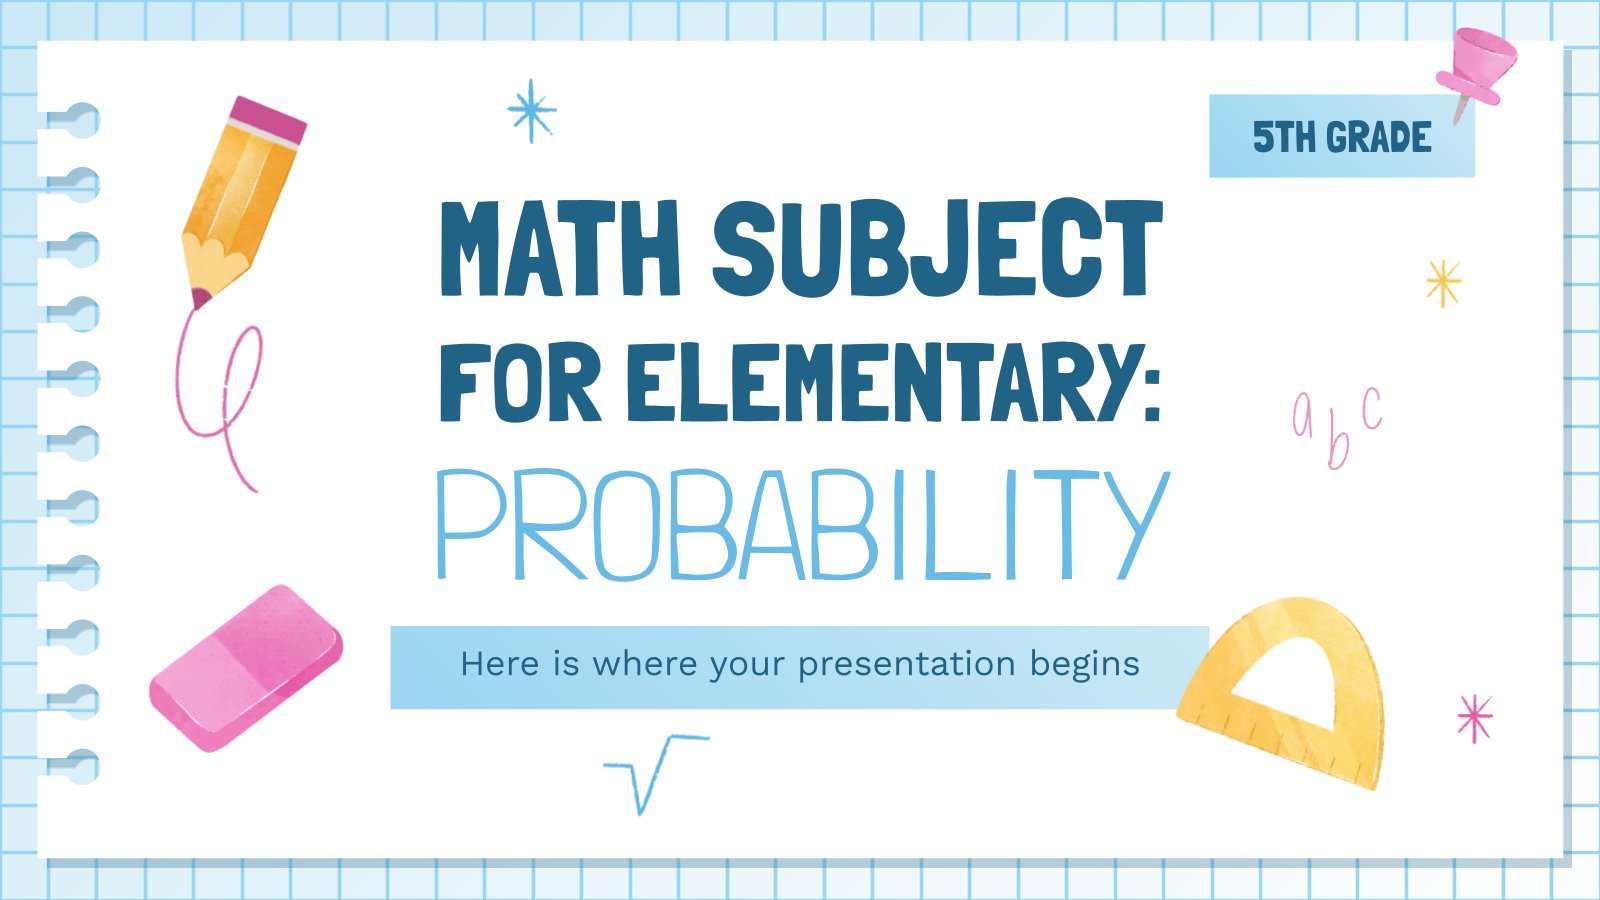 Math Subject for Elementary - 5th Grade: Probability presentation template 